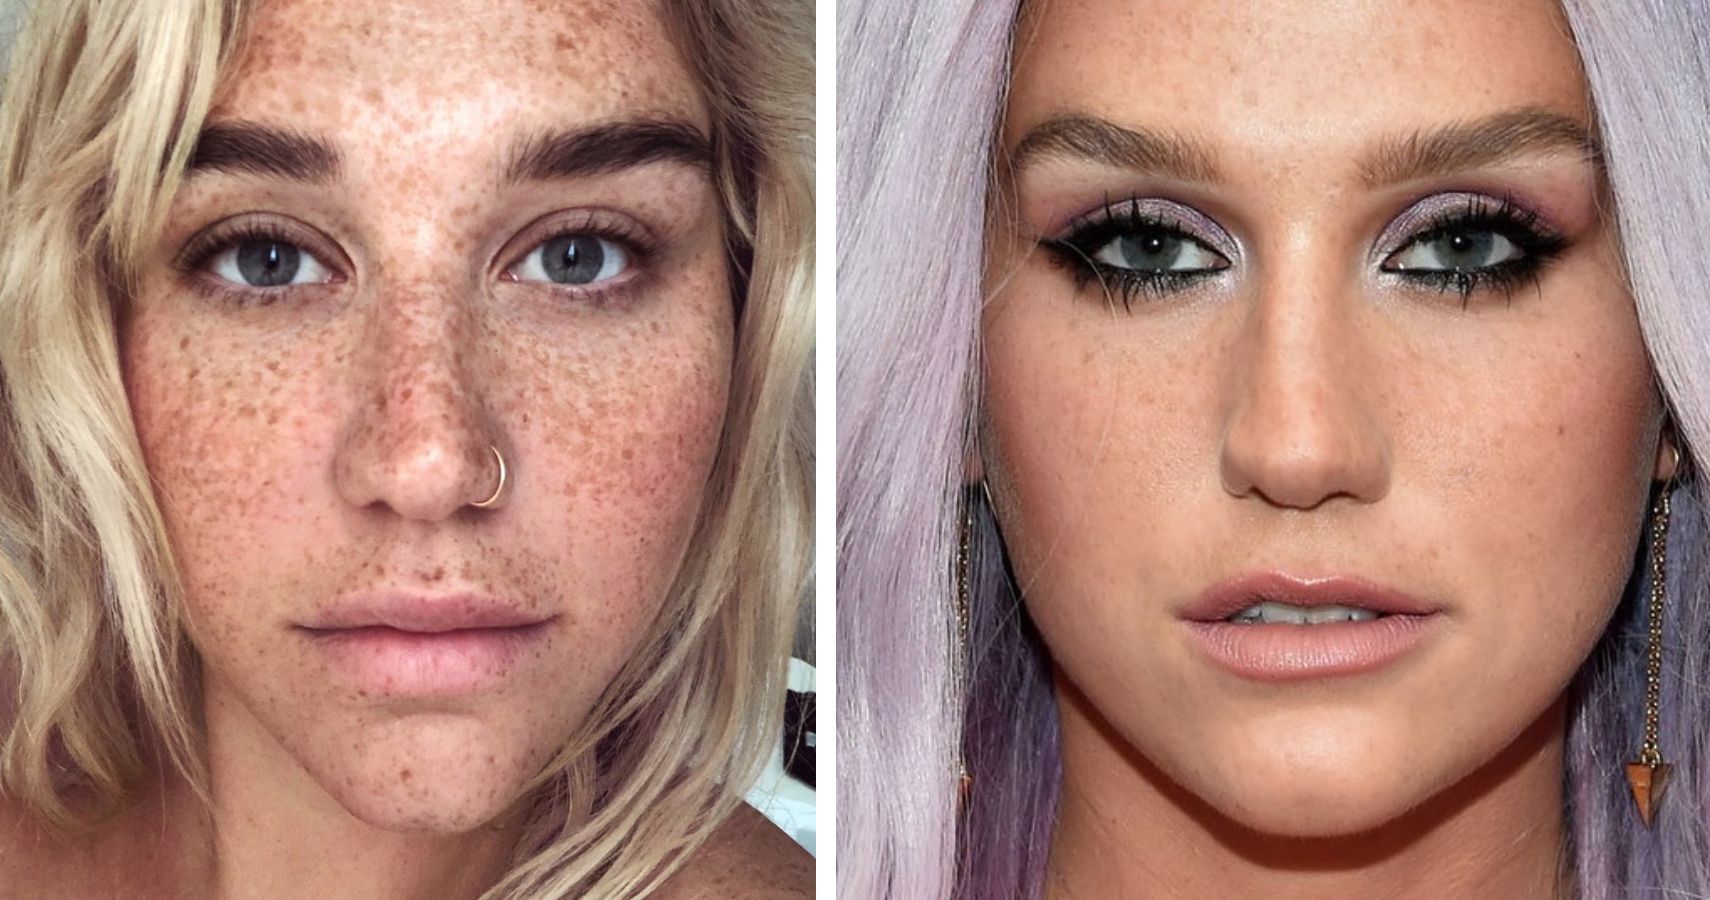 Kesha on the left has many freckles on her face, whereas Kesha on the right has makeup all over her face